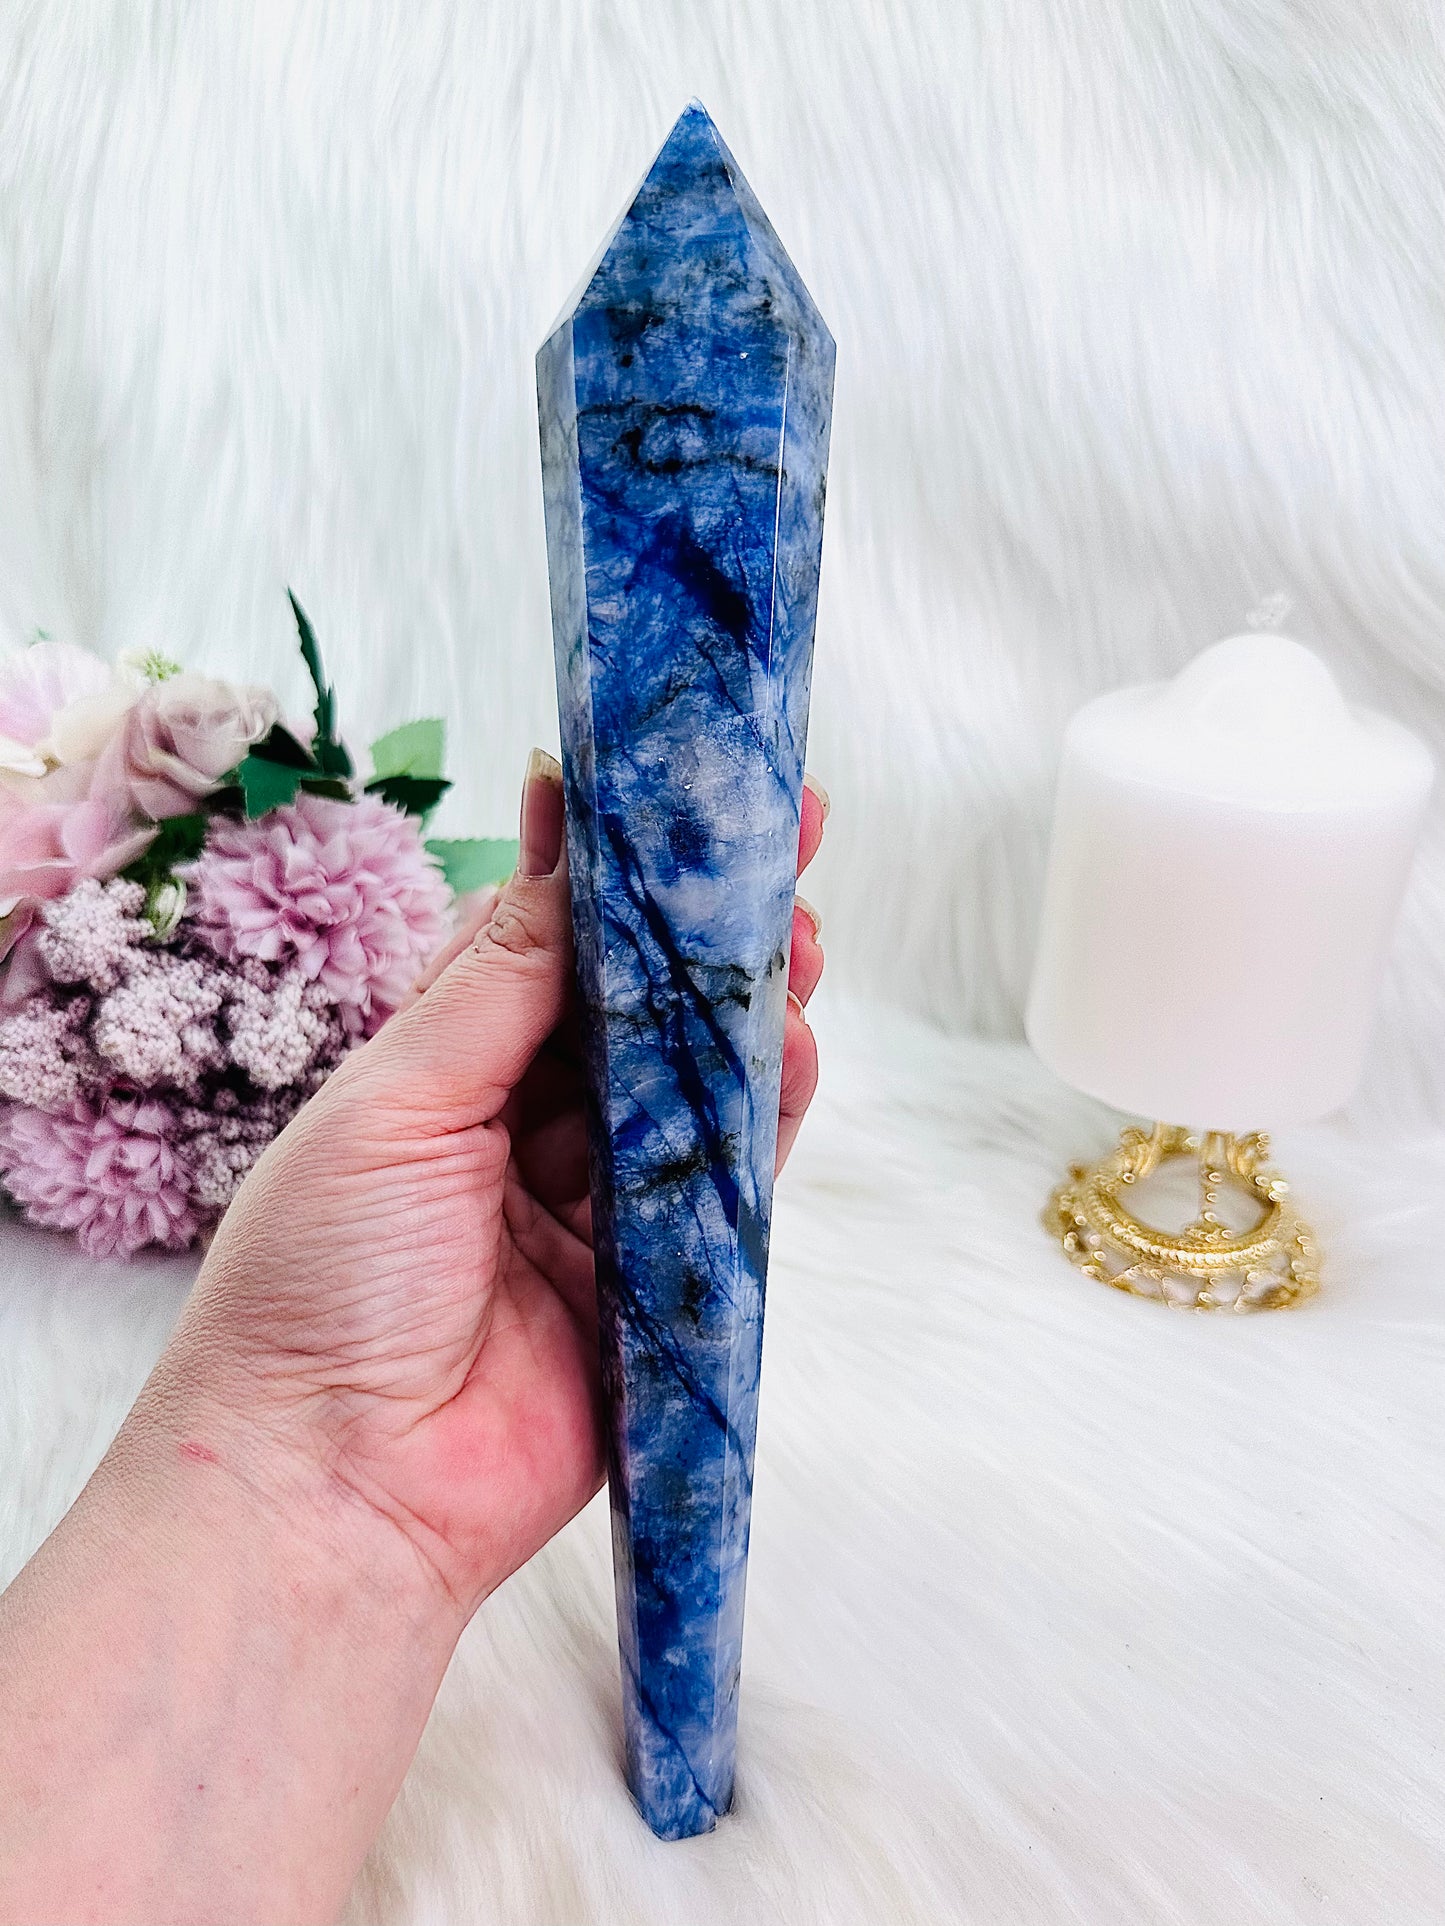 Classy & Absolutely Fabulous Huge 33cm Blue Sodalite Tower | Wand On Gold Stand